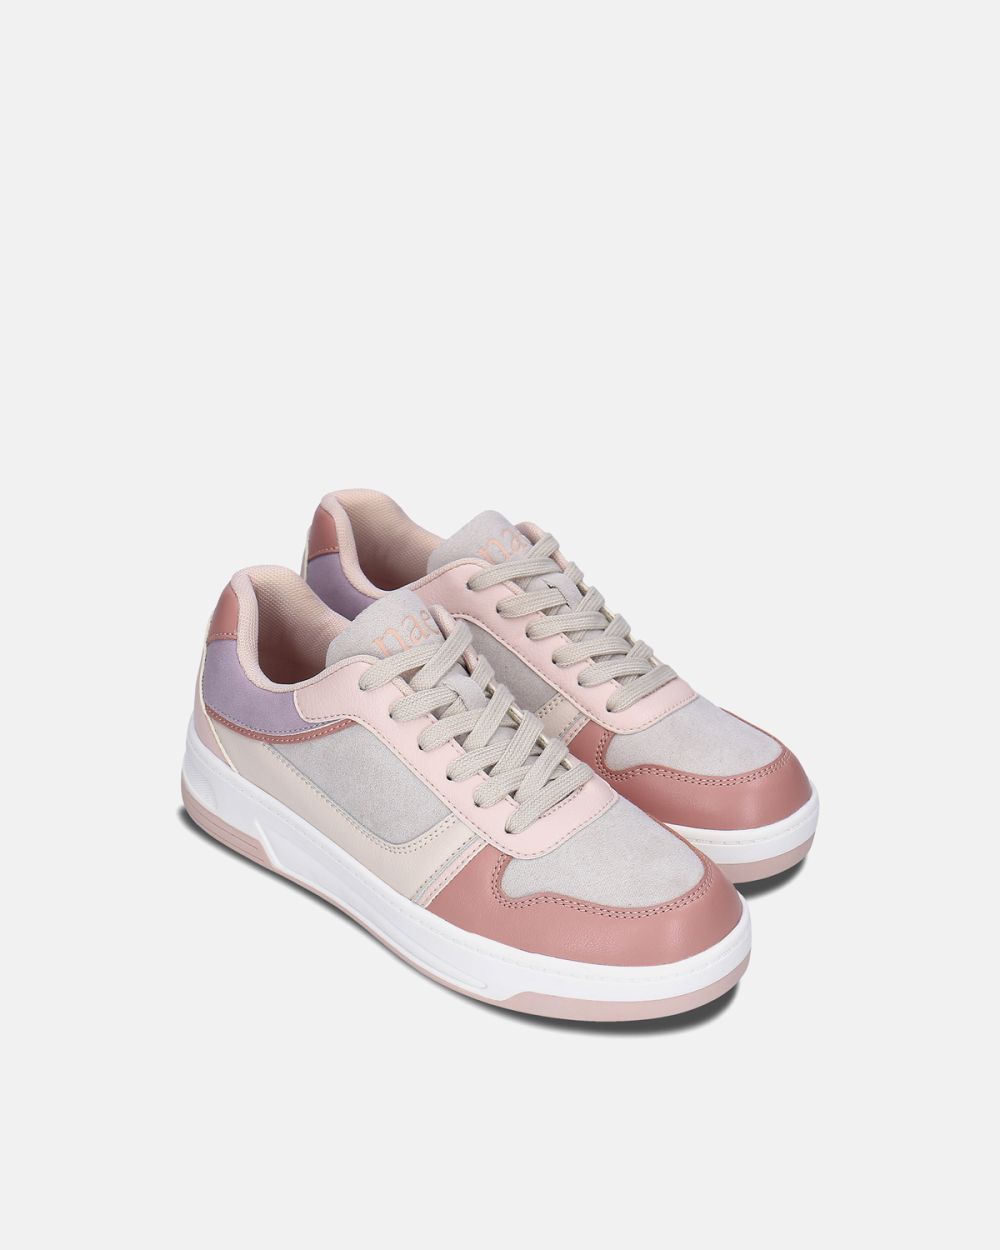 Dara Pink lace-up basic sport sneakers